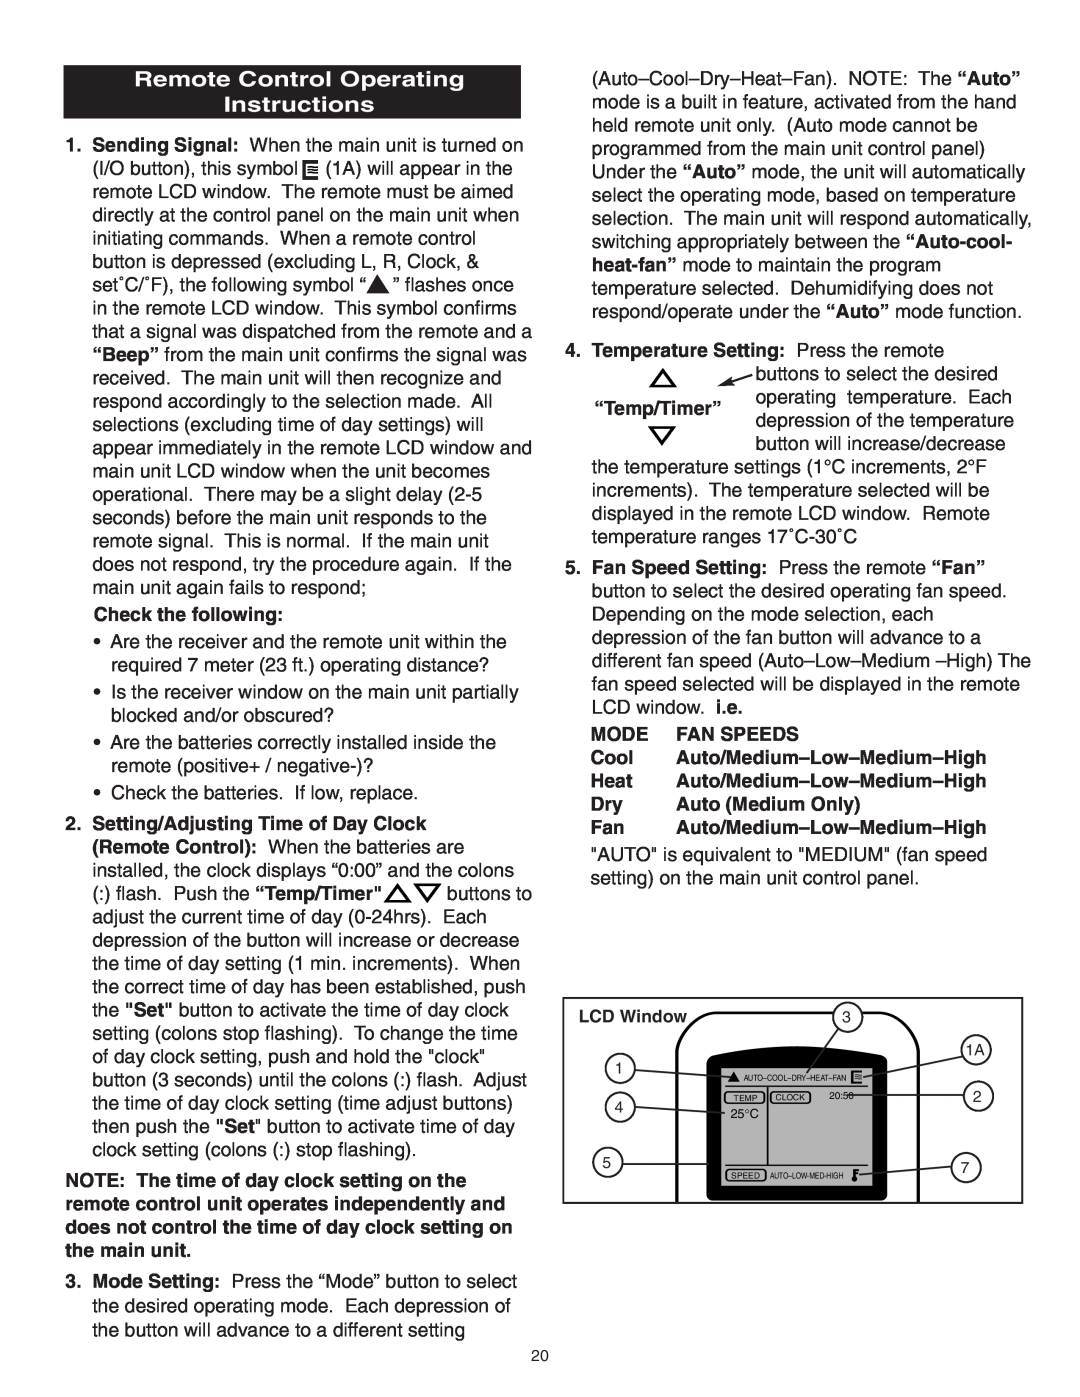 Danby SPAC8499 Remote Control Operating Instructions, Temperature Setting: Press the remote, “Temp/Timer”, Mode, Cool 